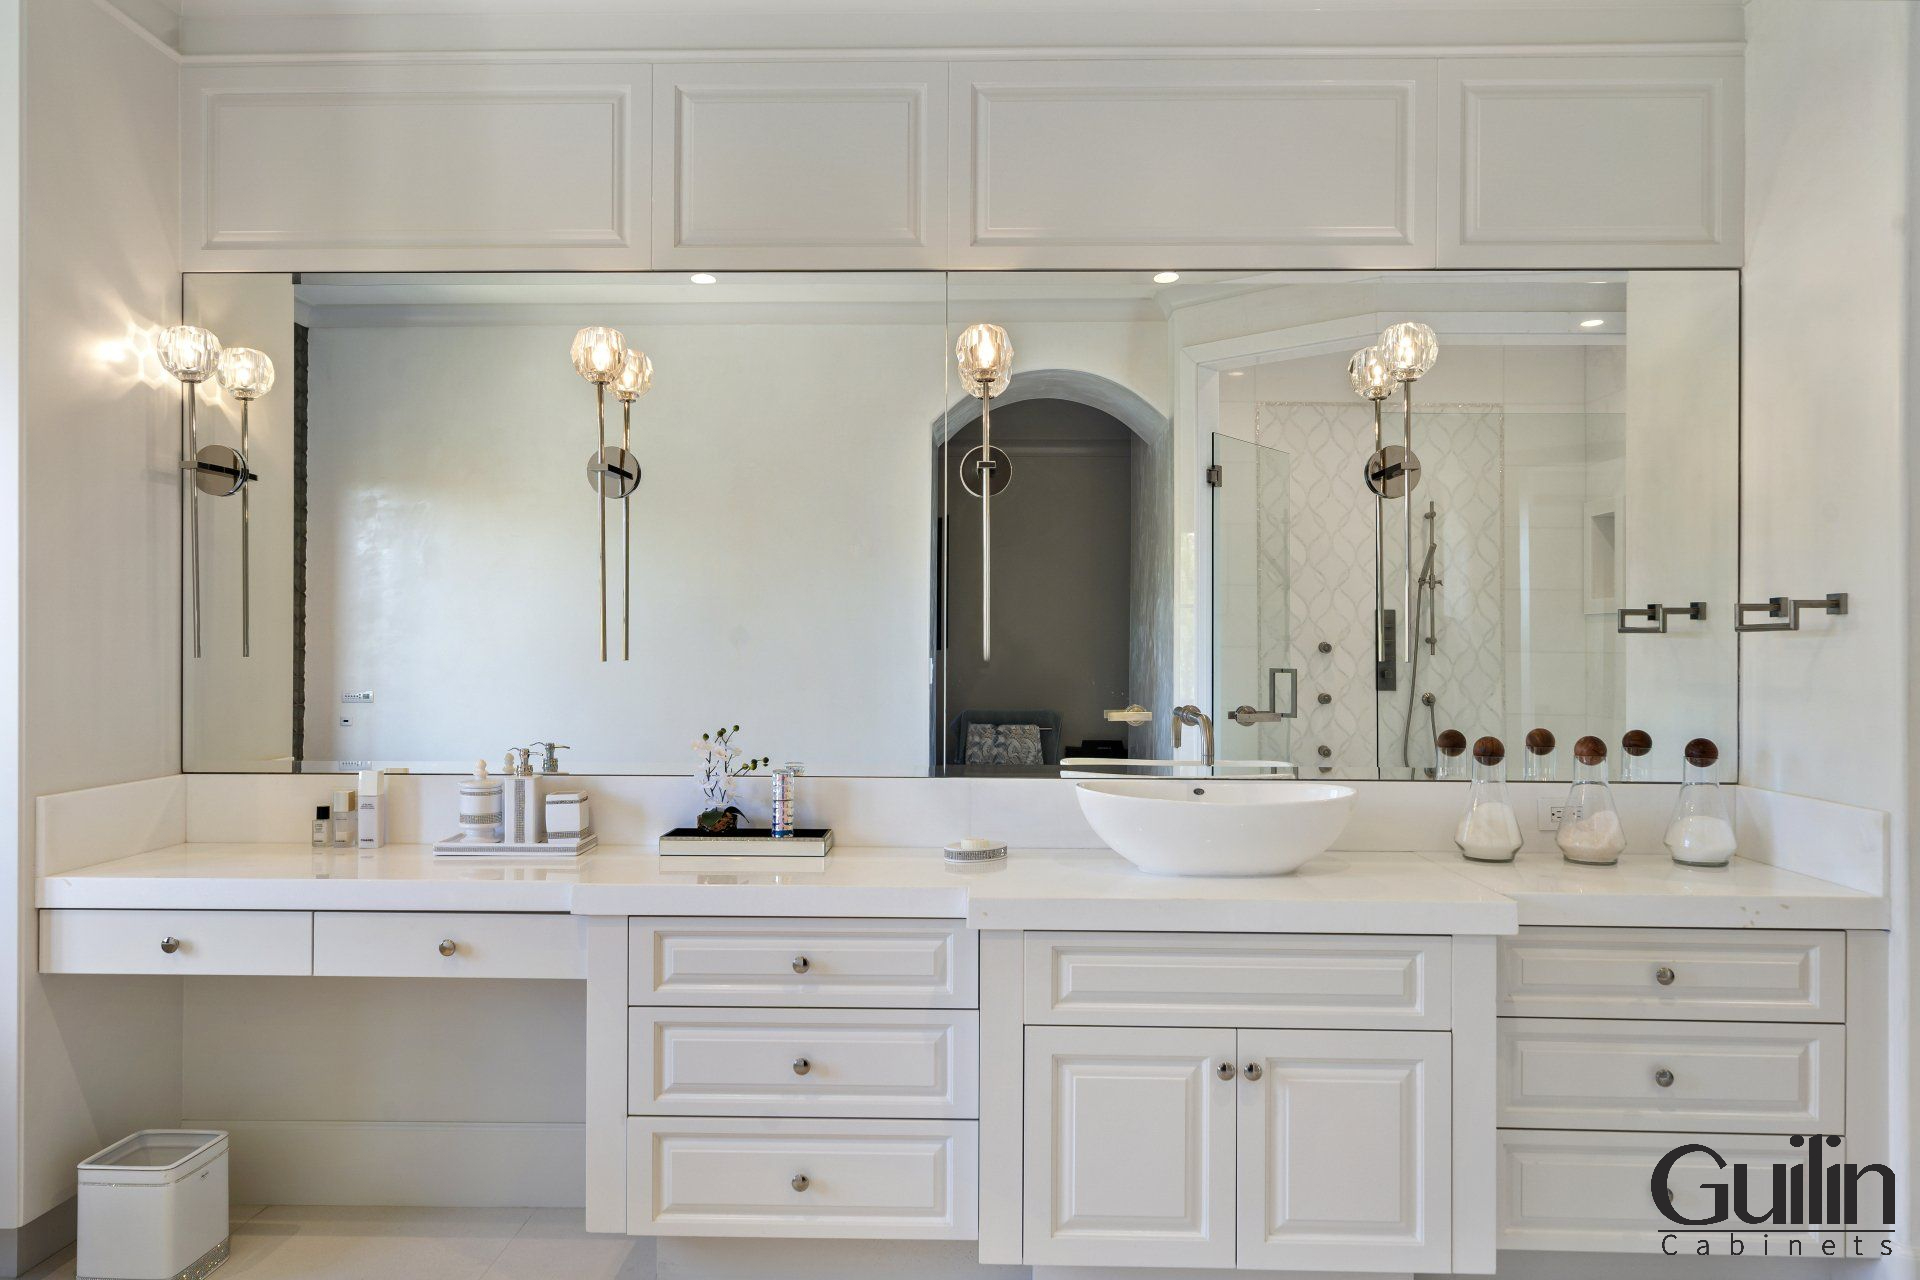 The material of the vanity plays a vital role in determining its weight capacity. 